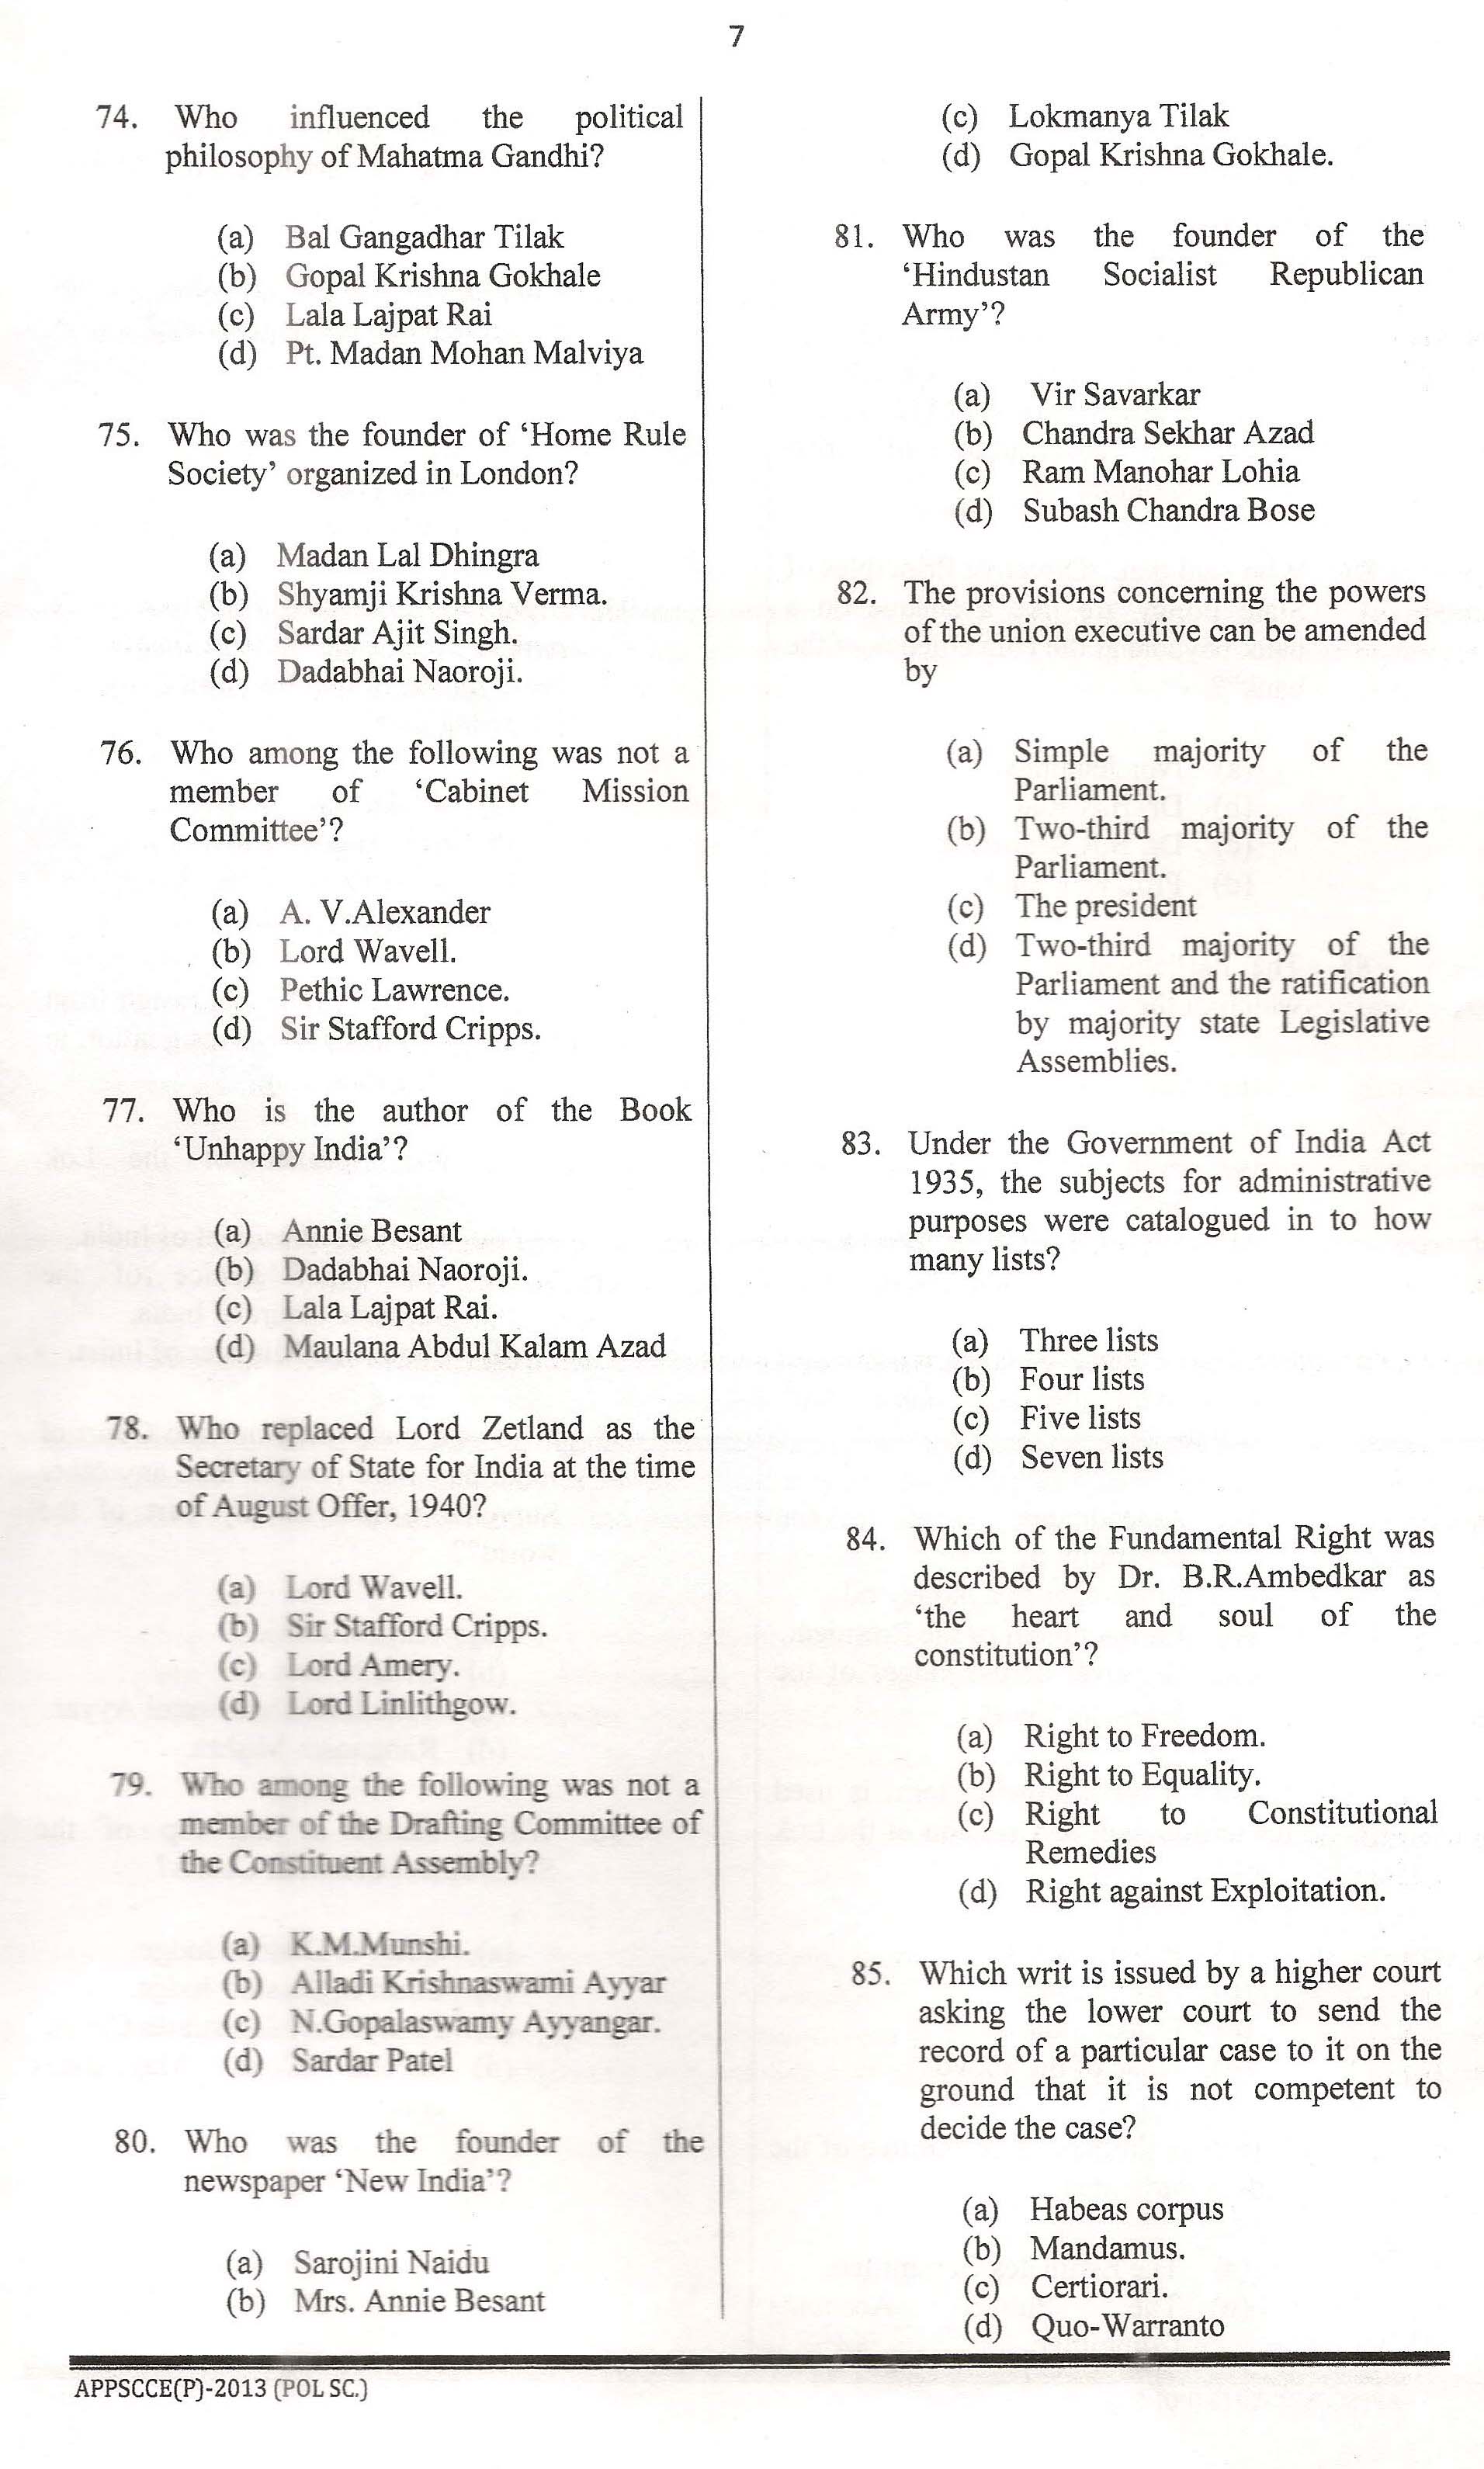 APPSC Combined Competitive Prelims Exam 2013 Political Science 8